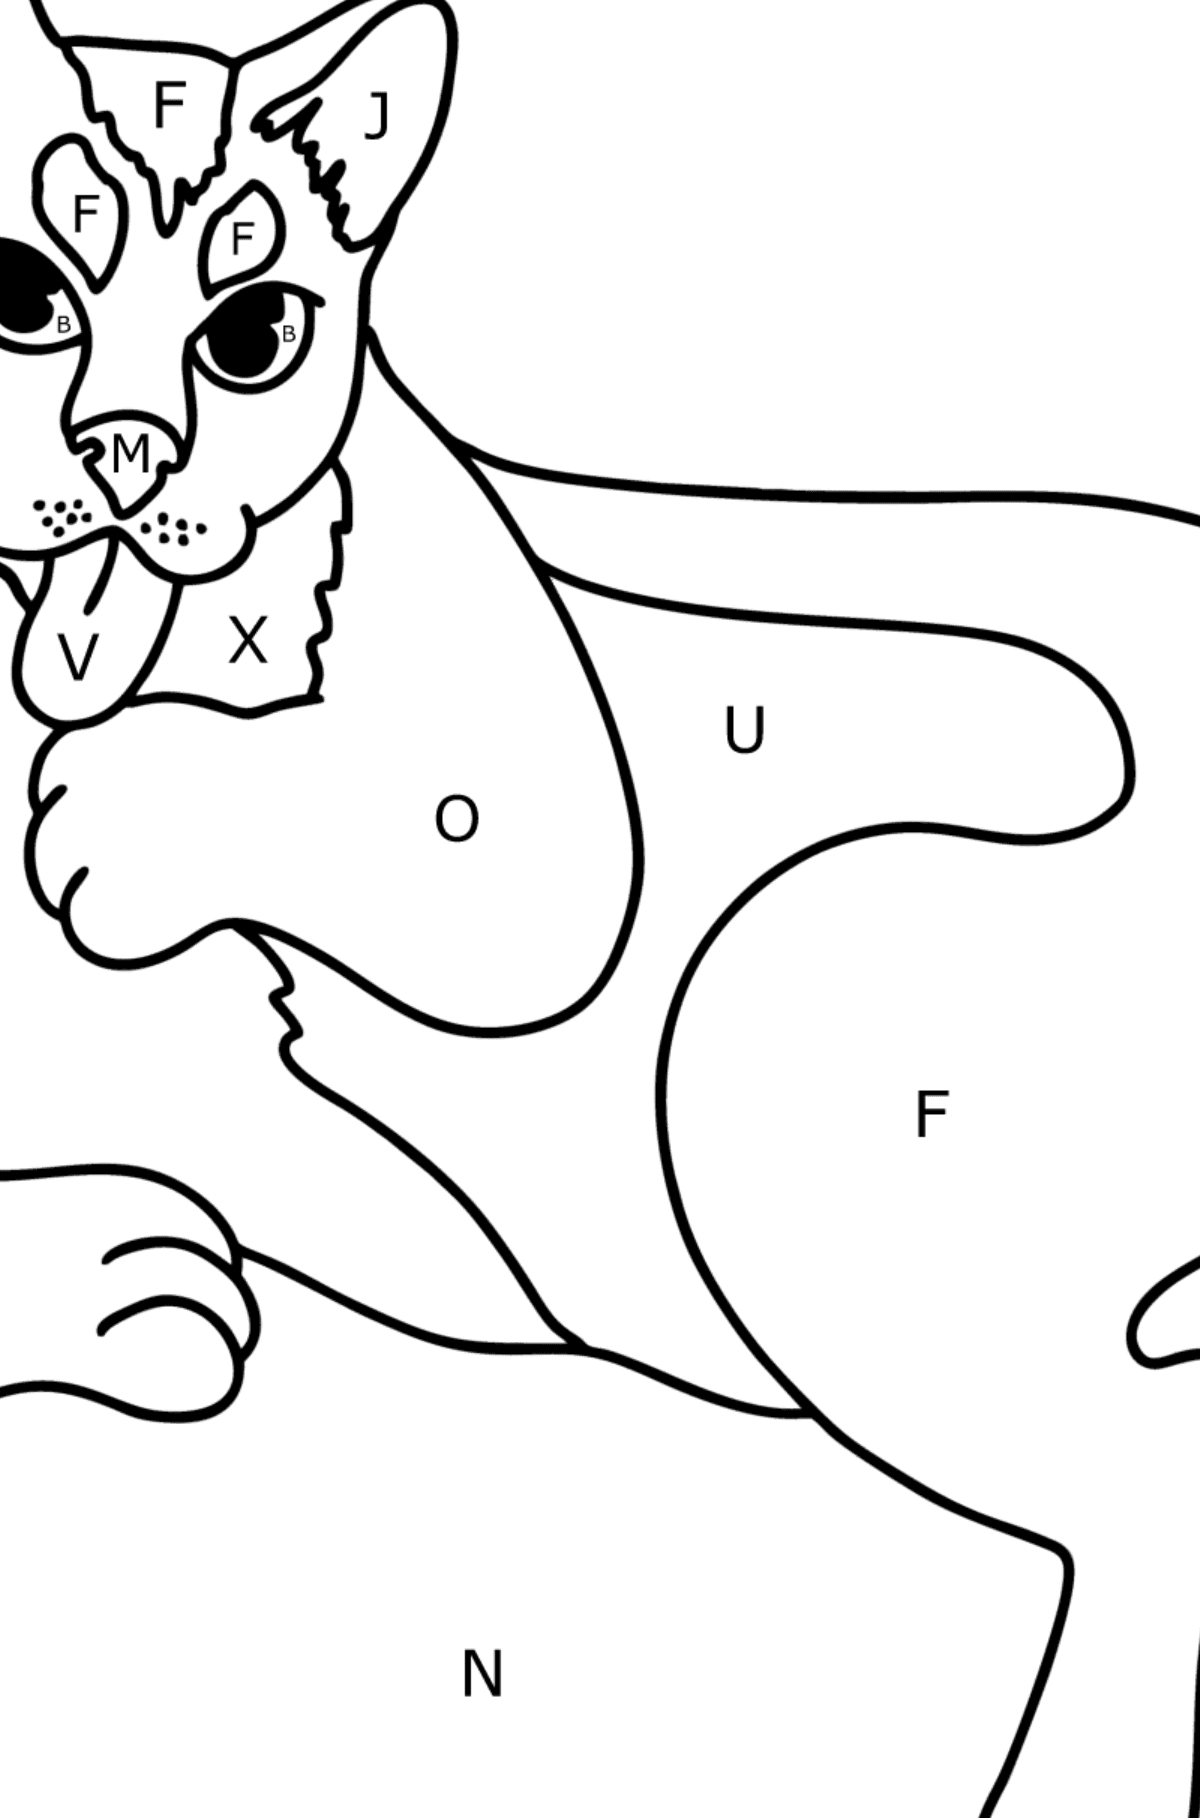 Black Cat coloring page - Coloring by Letters for Kids